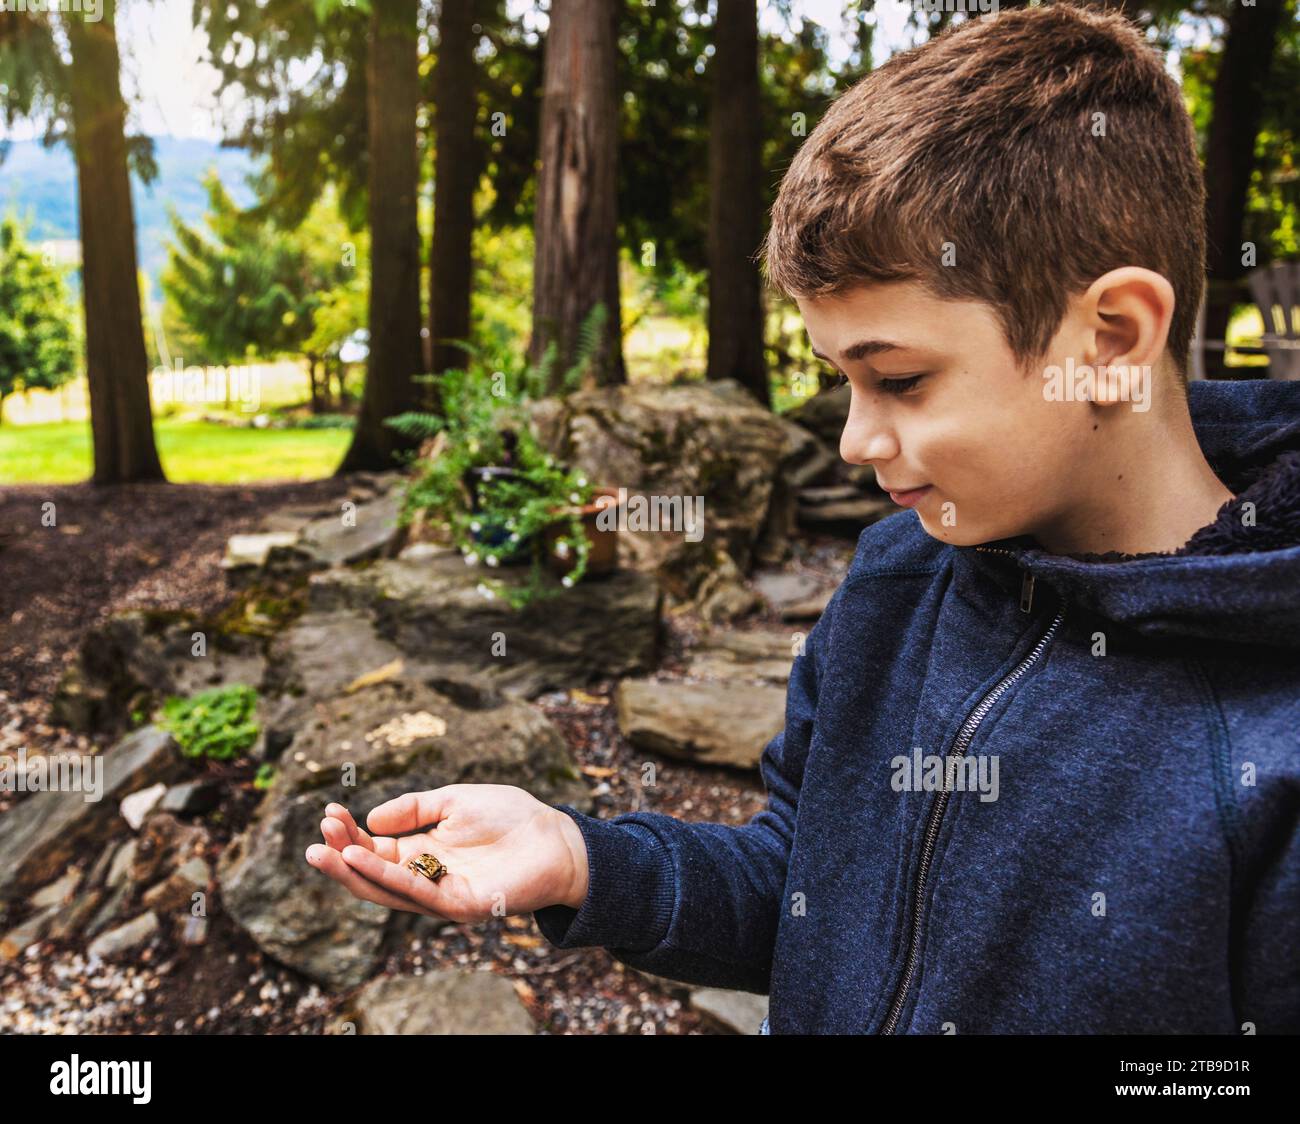 Close-up portrait of a young boy holding a small frog in his hand while on vacation; Sicamous, British Columbia, Canada Stock Photo